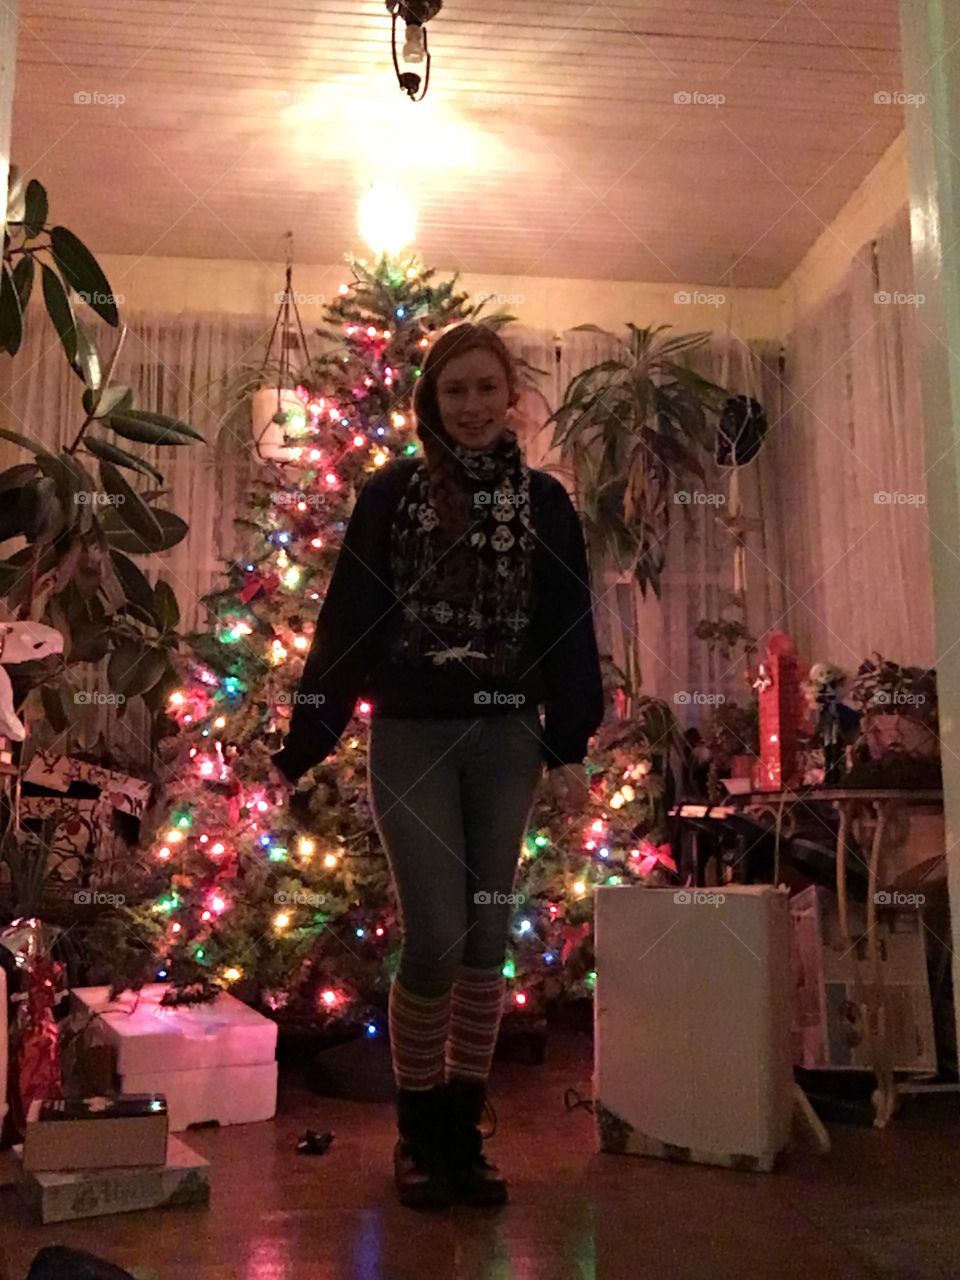 Me standing infront of Christmas tree